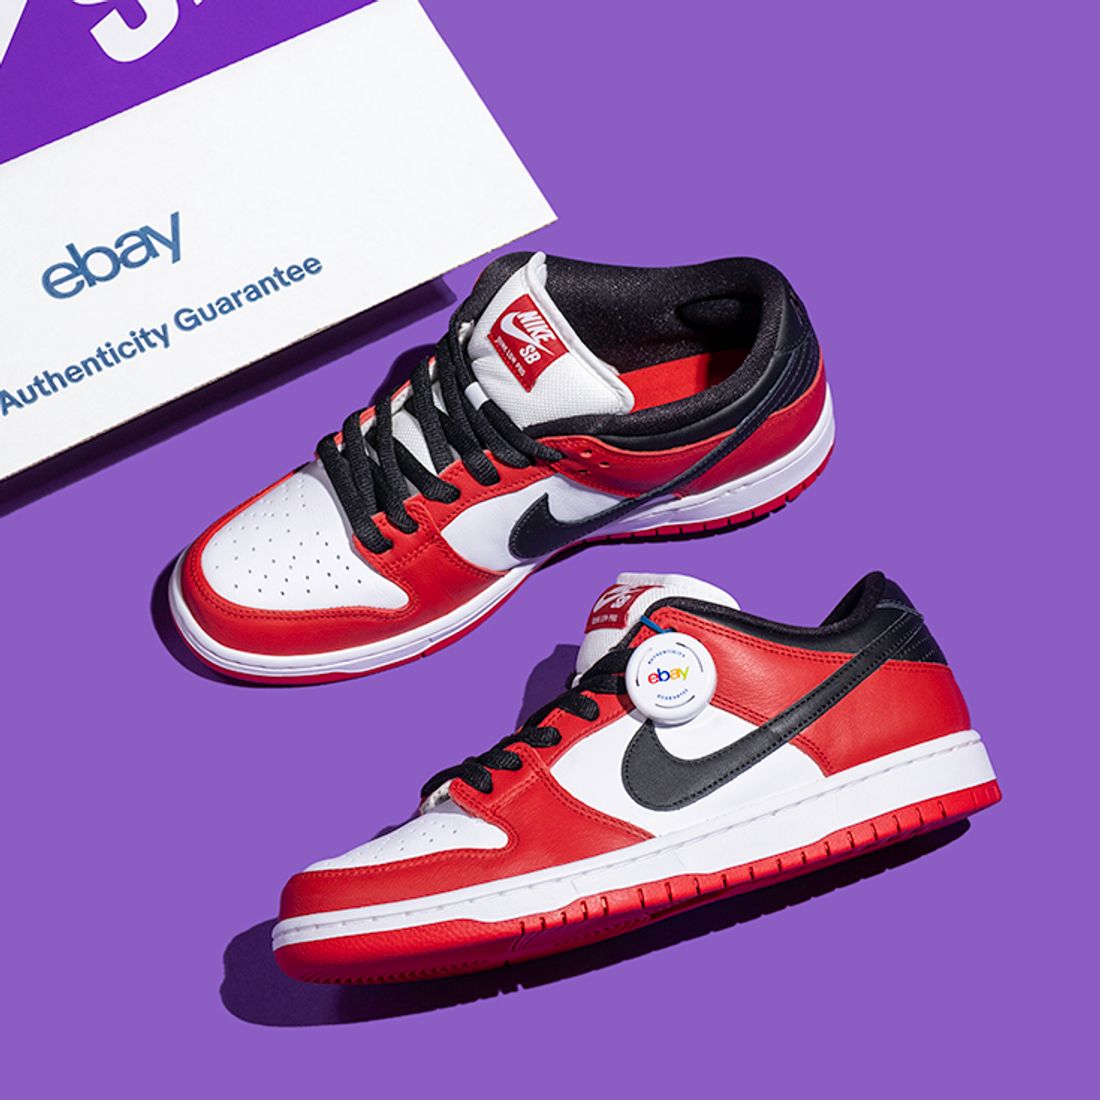 launches sneaker authentication service to combat counterfeit sales -  The Verge